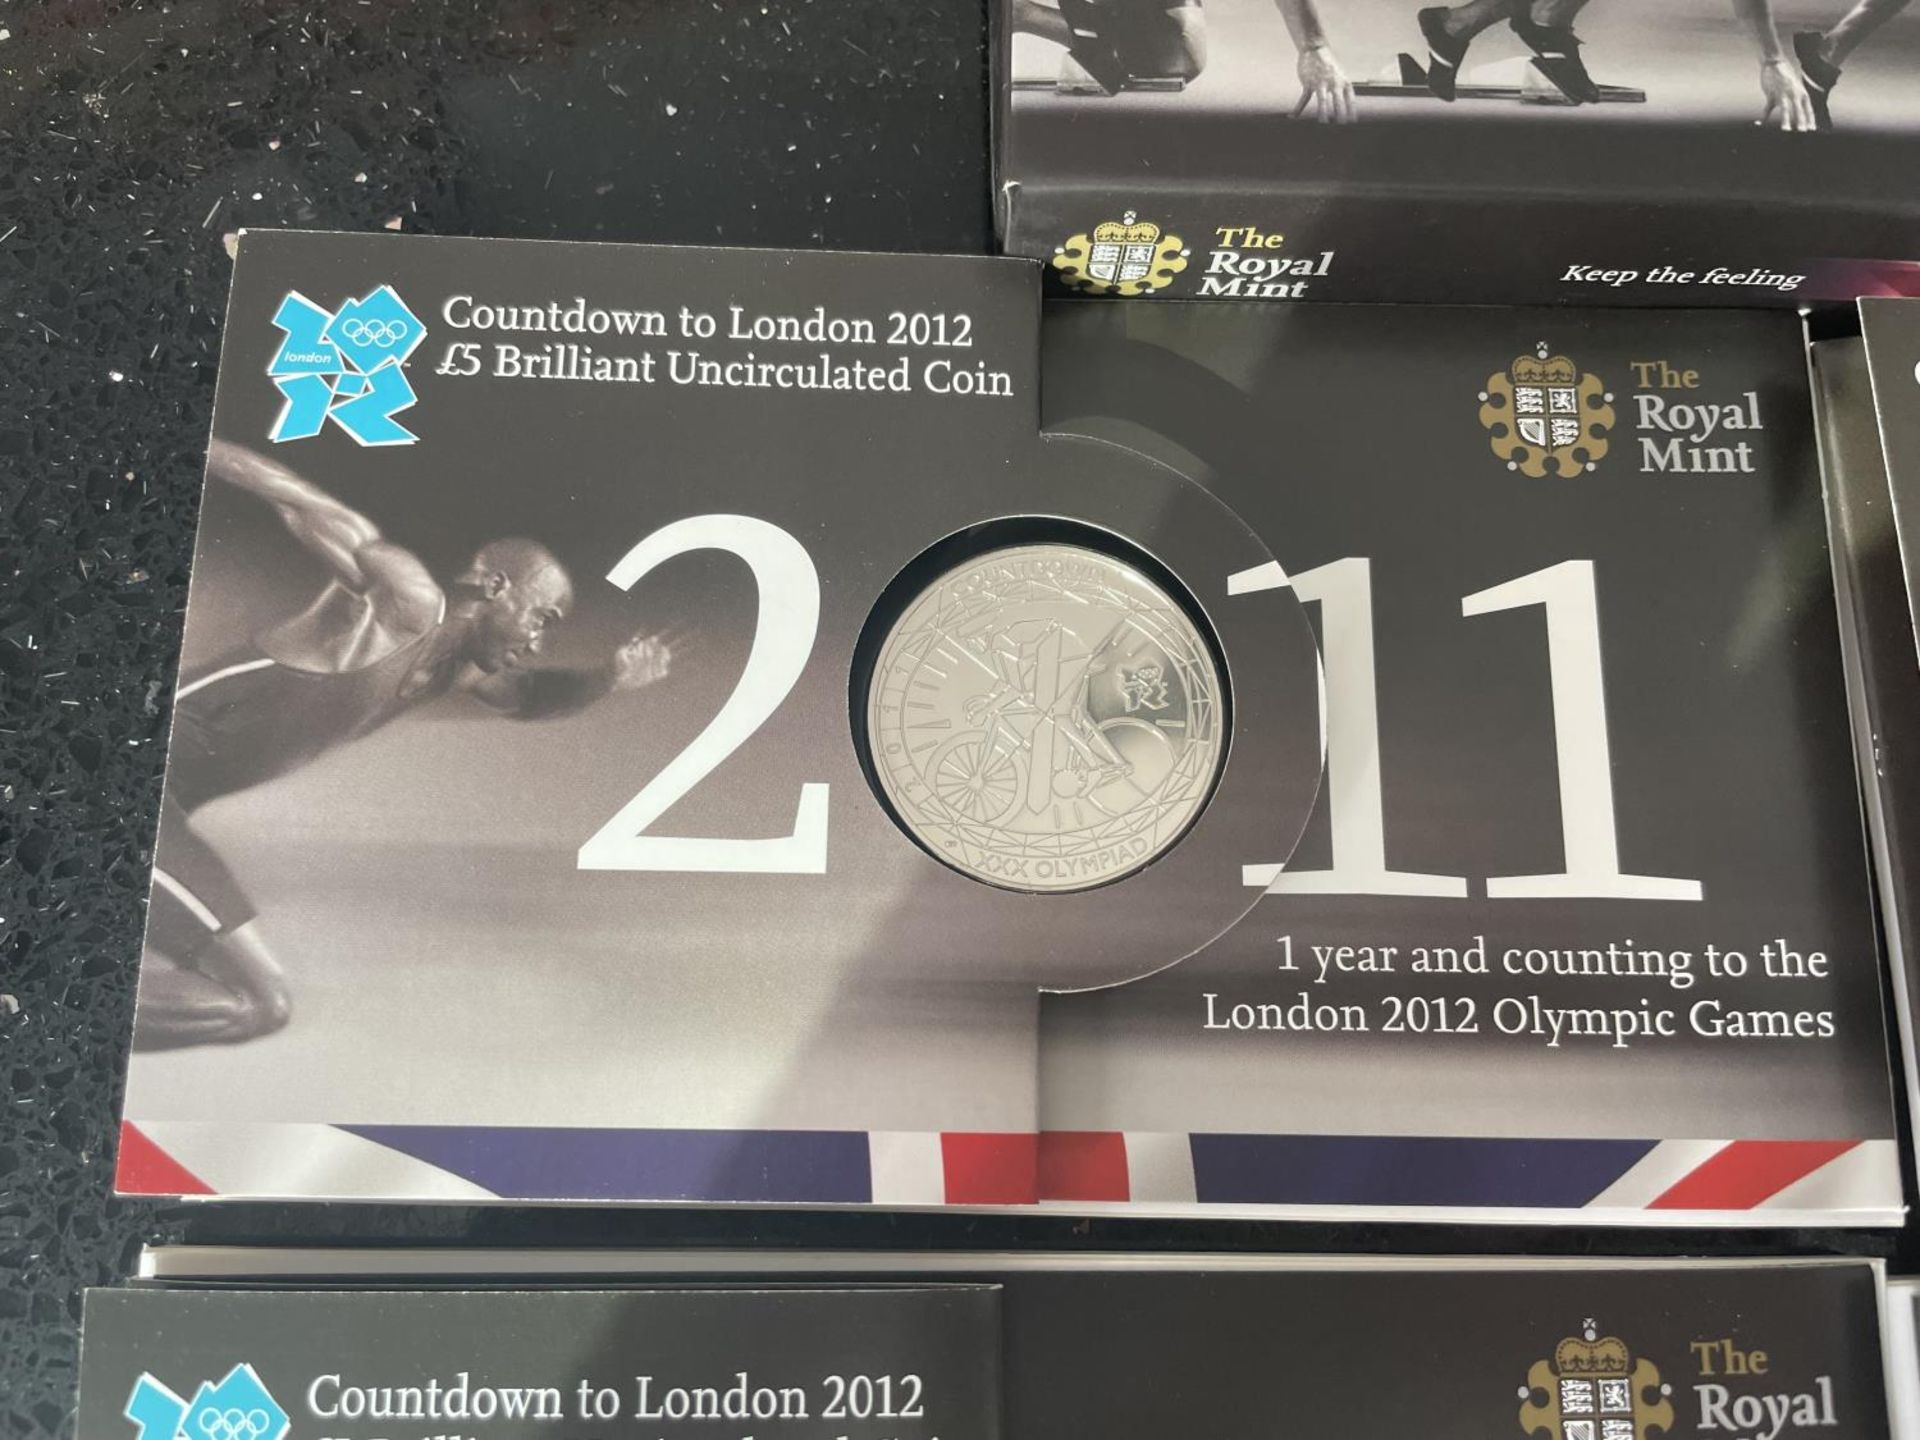 THE COMPLETE COLLECTION “COUNTDOWN LONDON 2012” 4 X £5 BRILLIANT, UNCIRCULATED COINS - Image 6 of 8